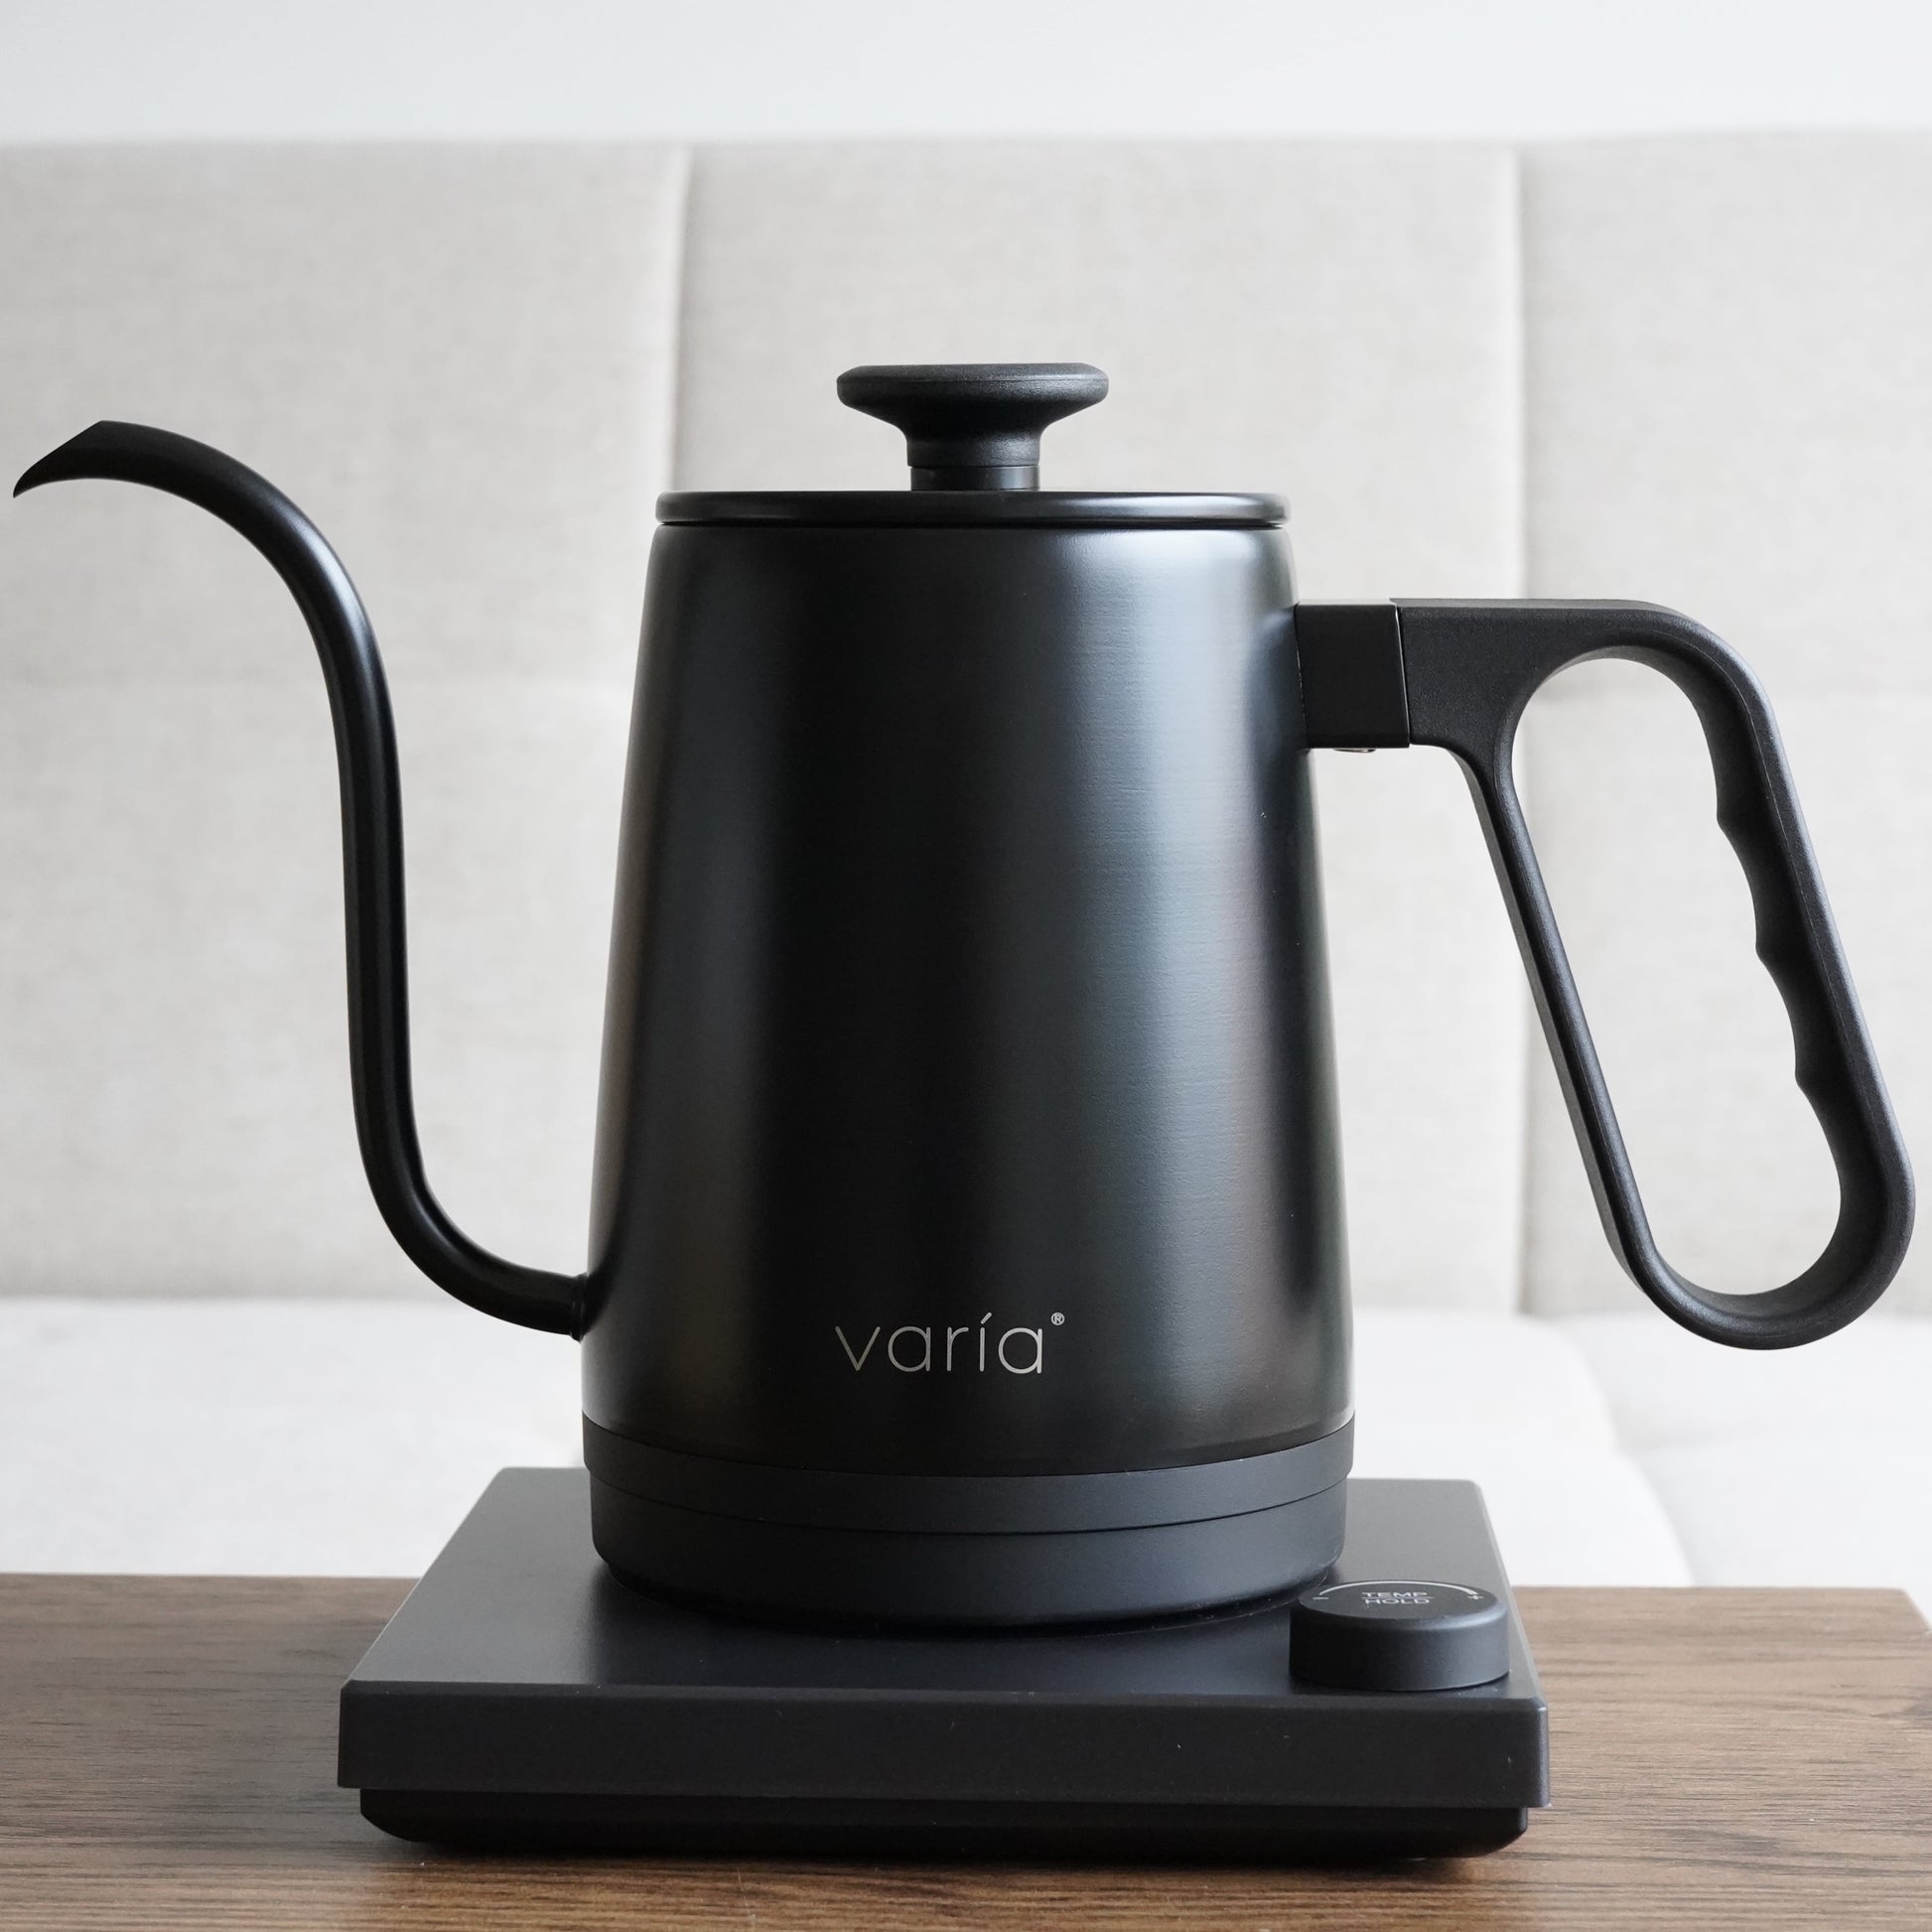 Pre Order Varia Smart Temperature Control Kettle (SOLD OUT)